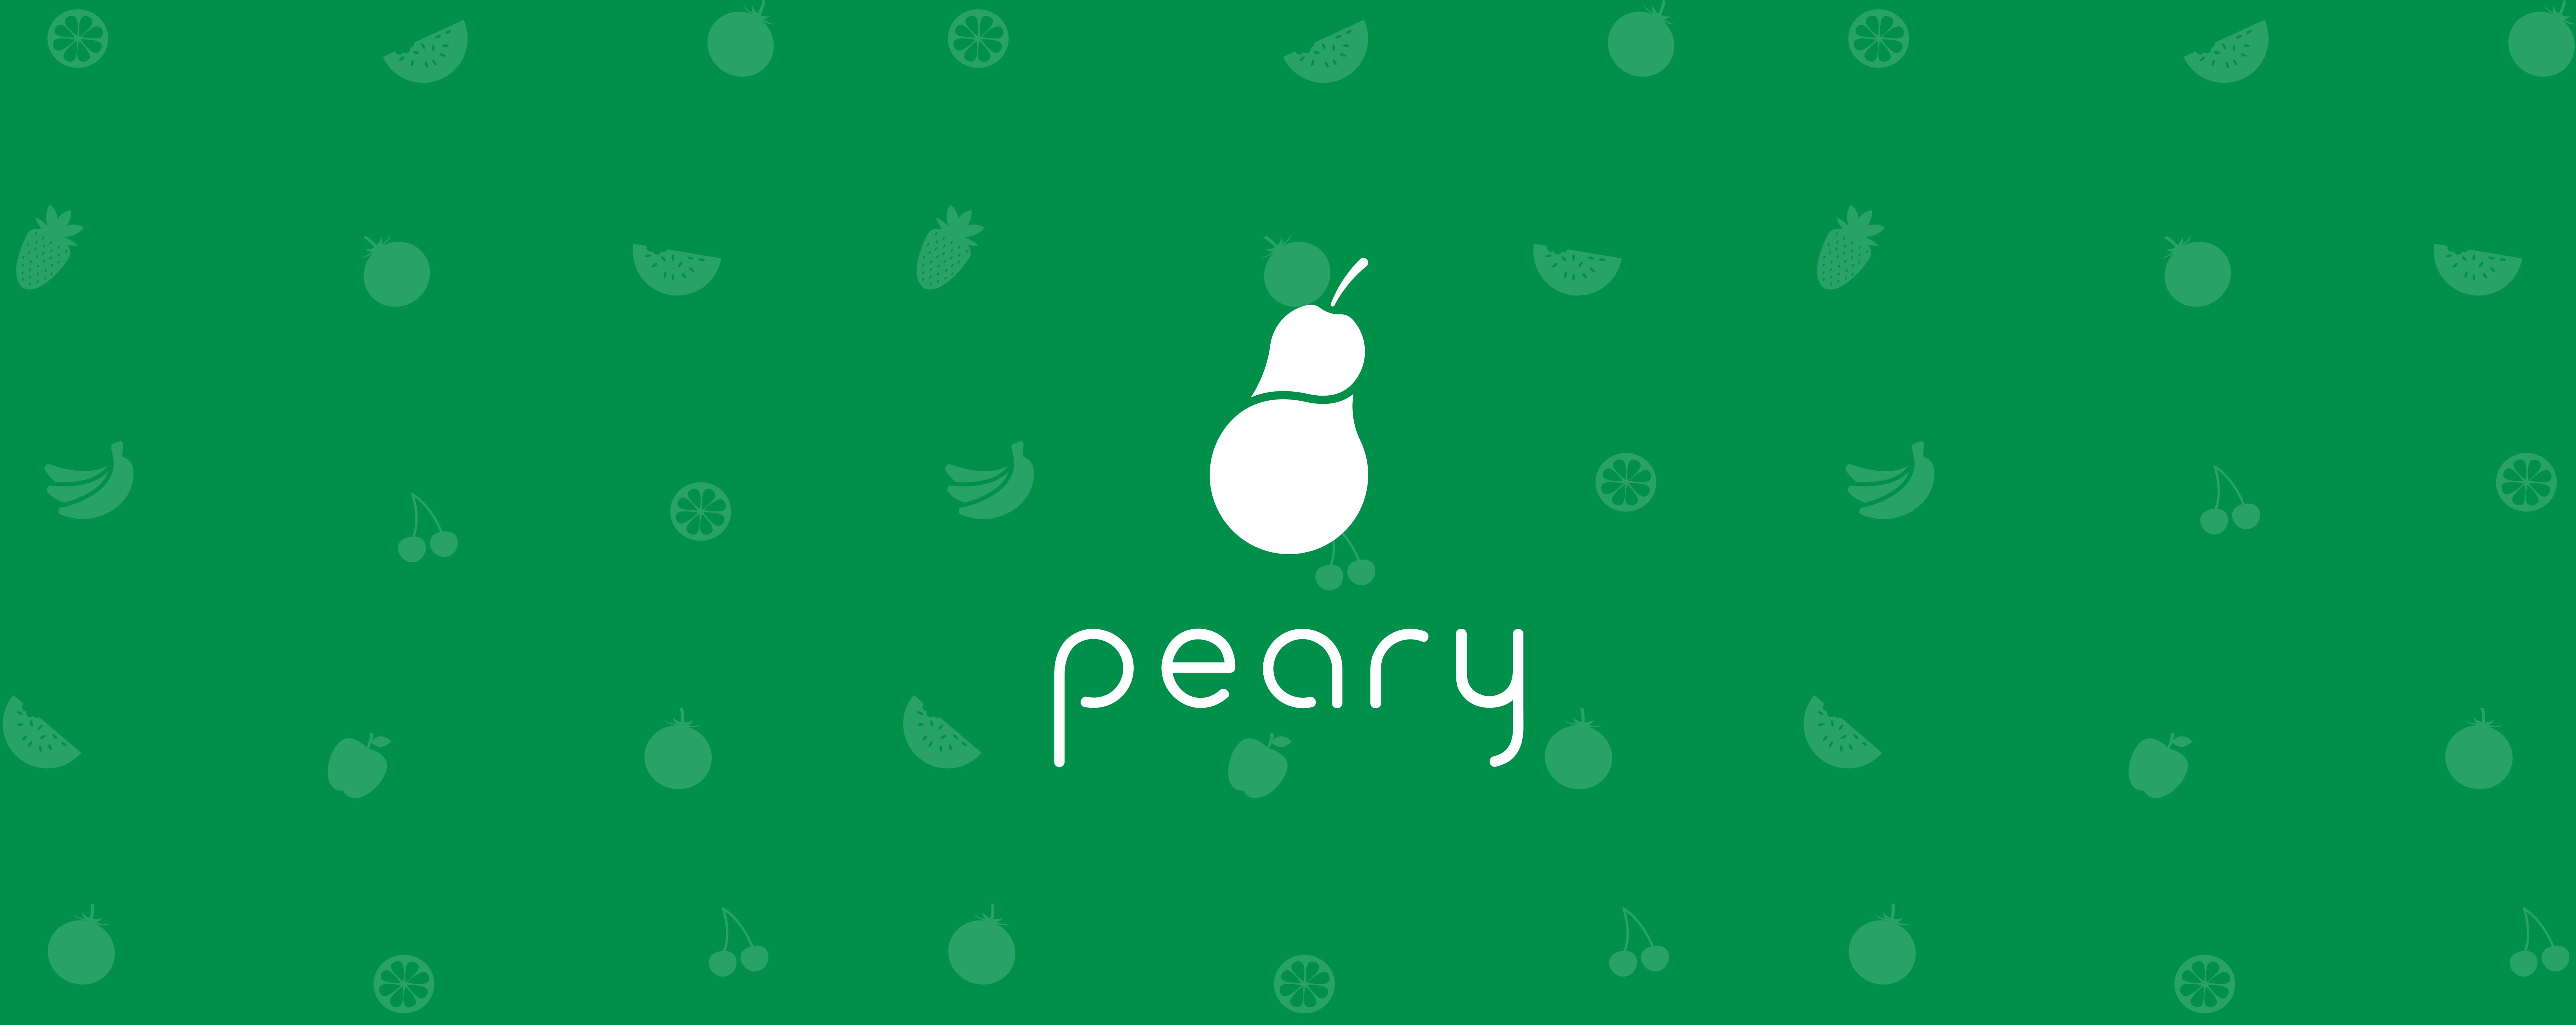 peary